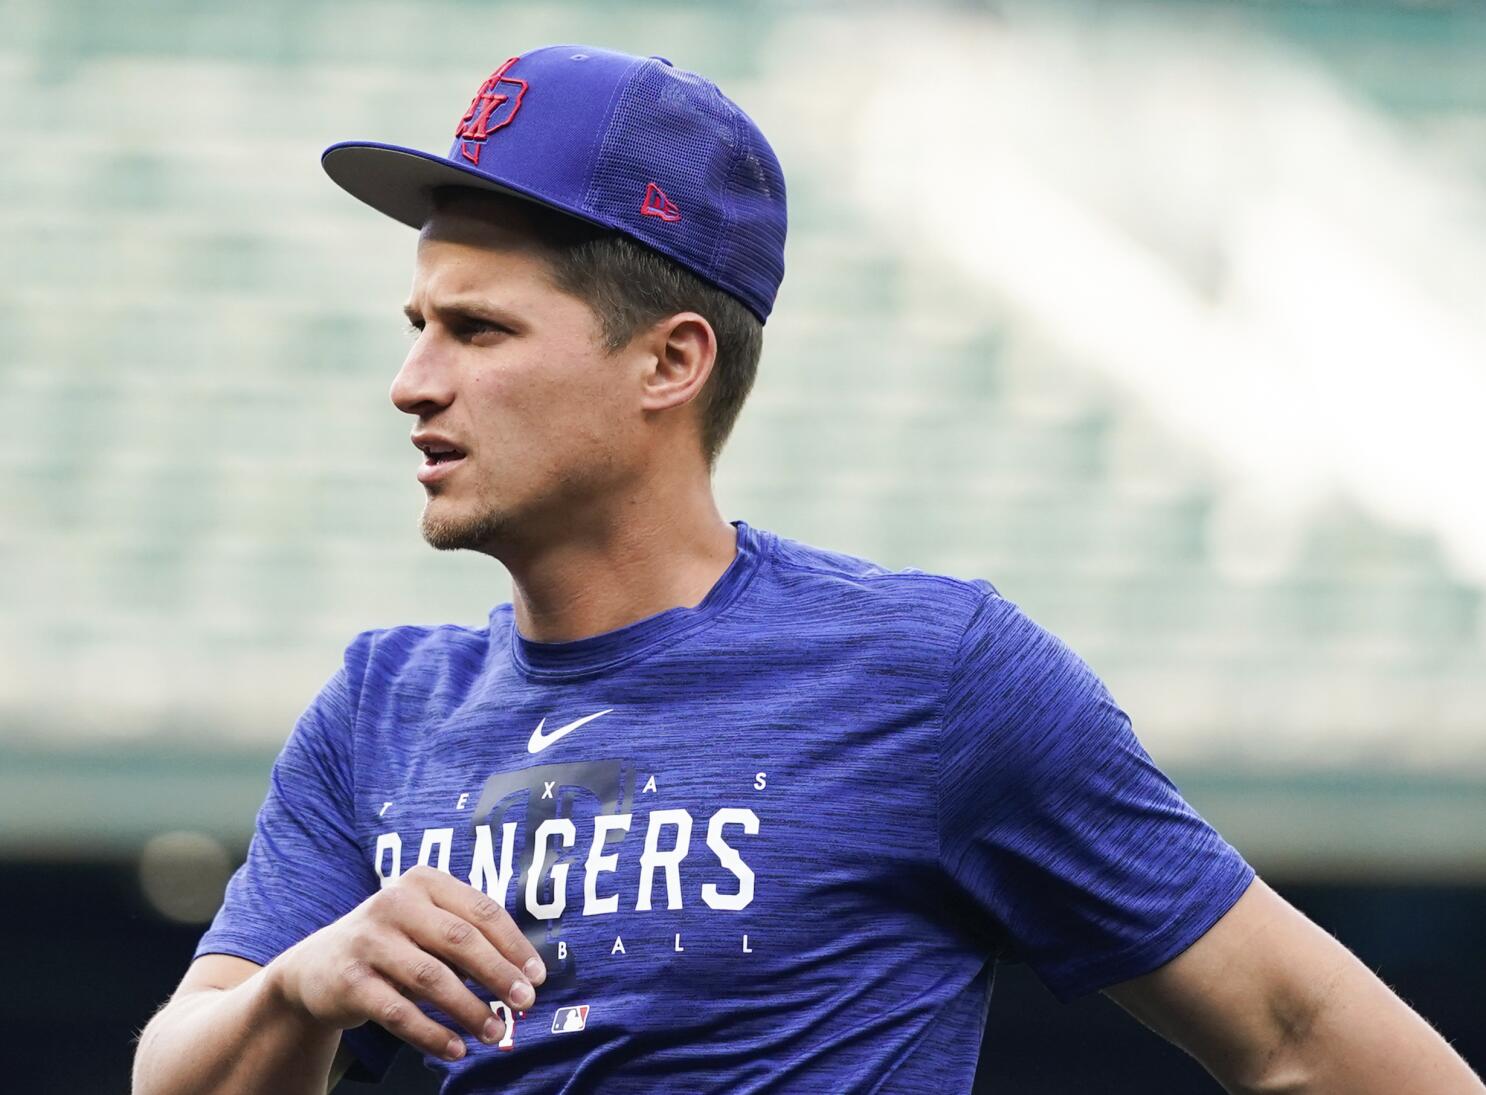 Rangers SS Seager's return from IL delayed by sickness, deGrom